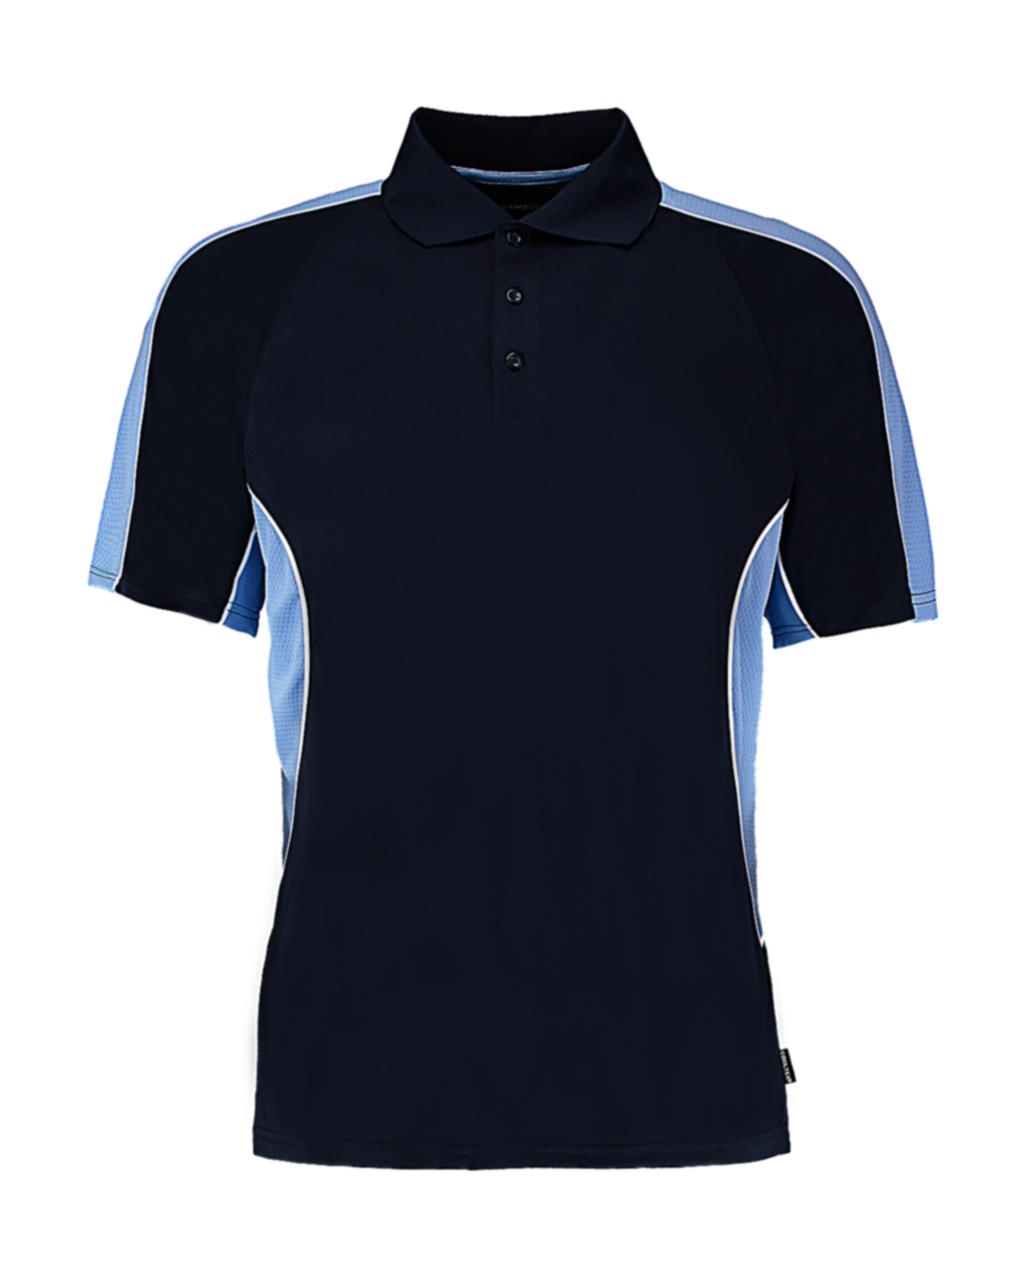  Classic Fit Cooltex? Contrast Polo Shirt in Farbe Navy/Light Blue